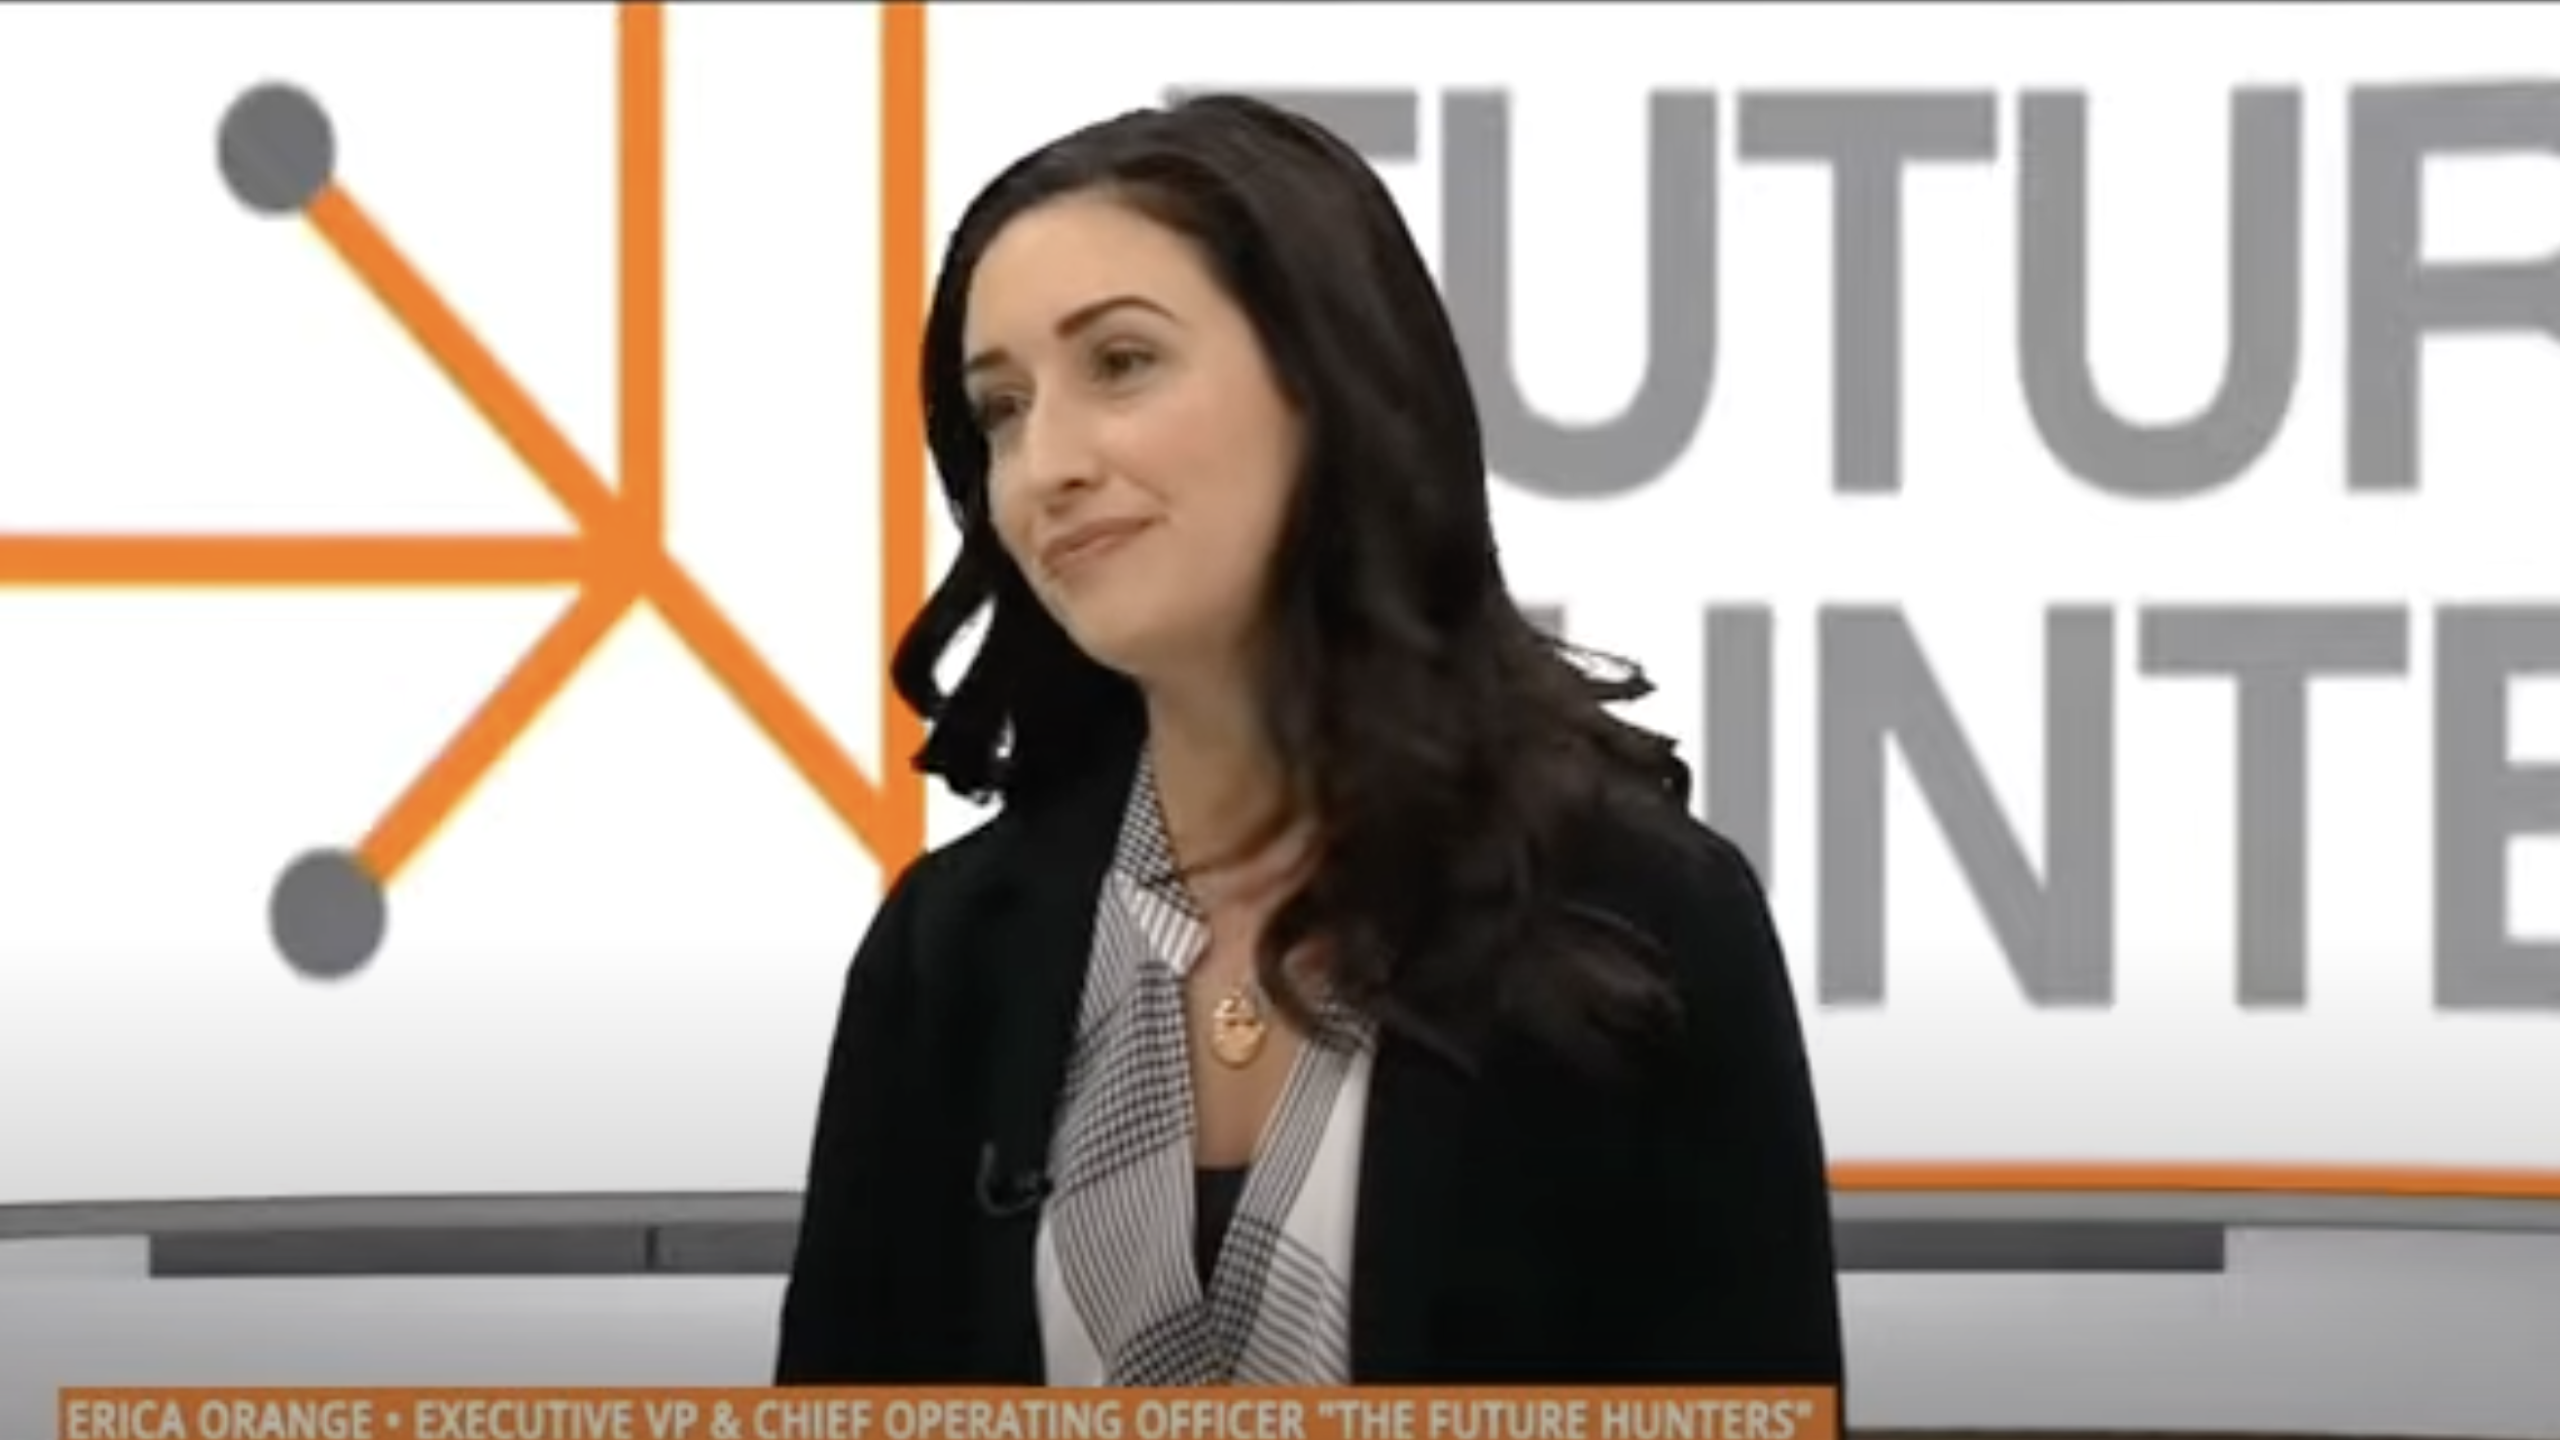 Erica Orange sitting in front of a screen with The Future Hunters logo on the ADN 40 News show in Mexico